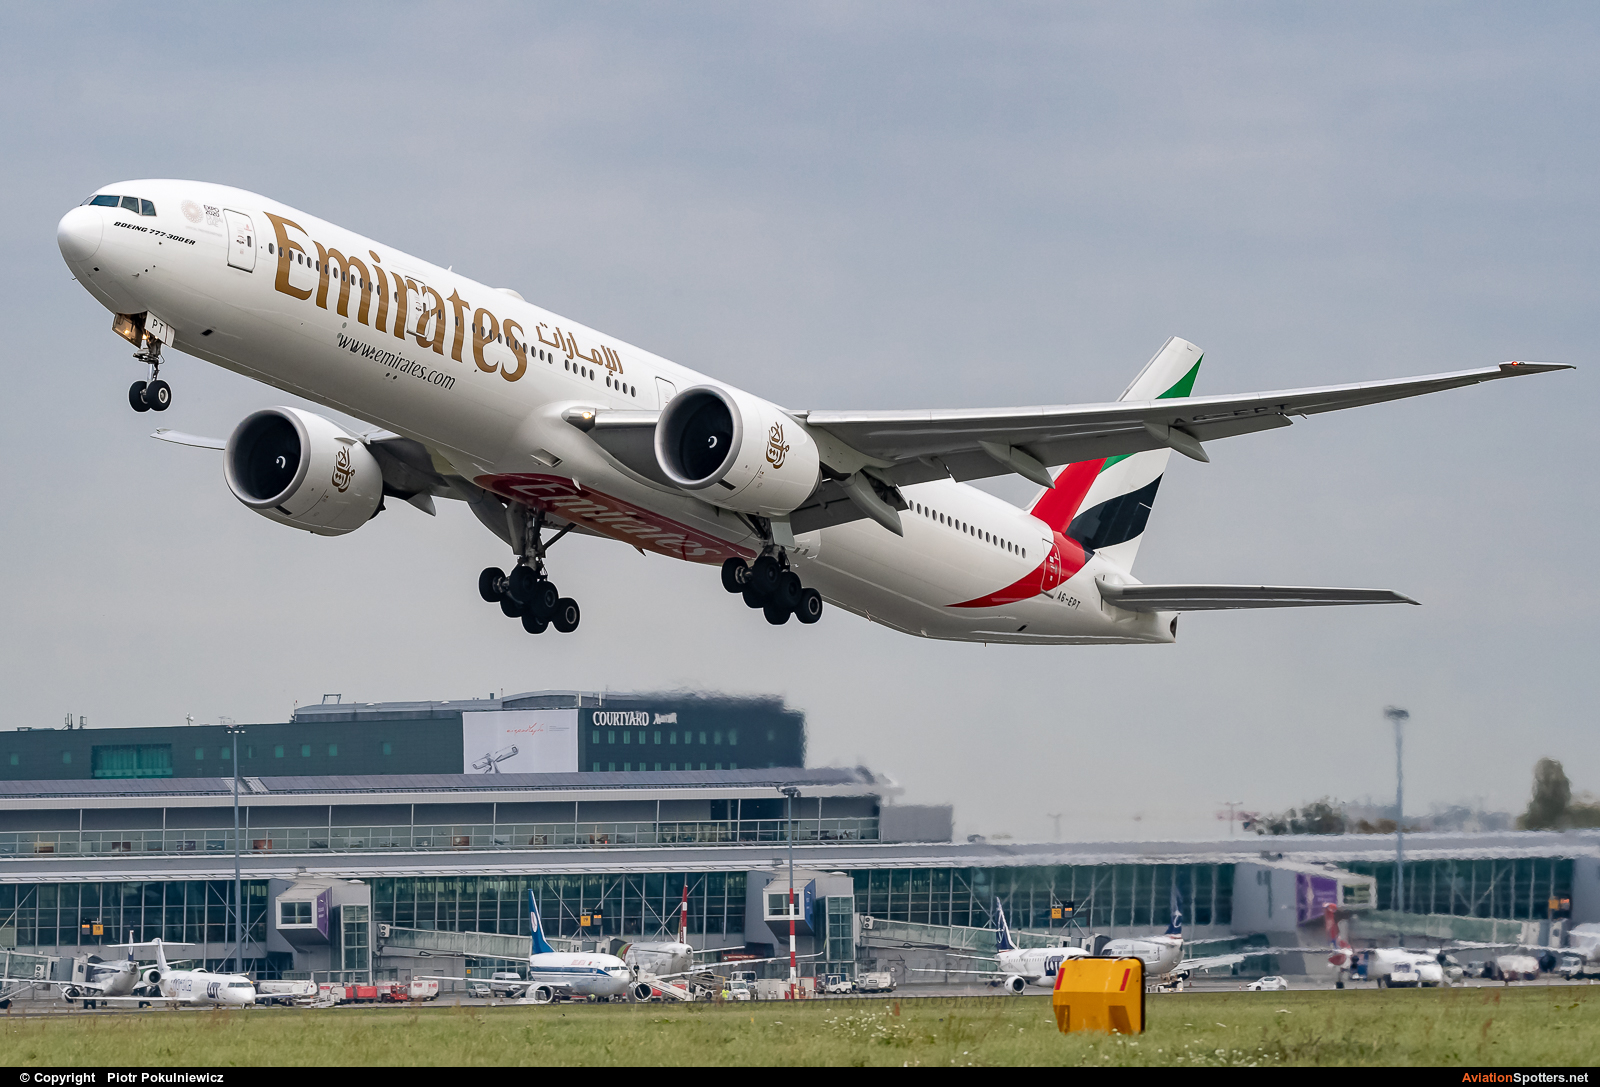 Emirates Airlines  -  777-300ER  (A6-EPT) By Piotr Pokulniewicz (Piciu)